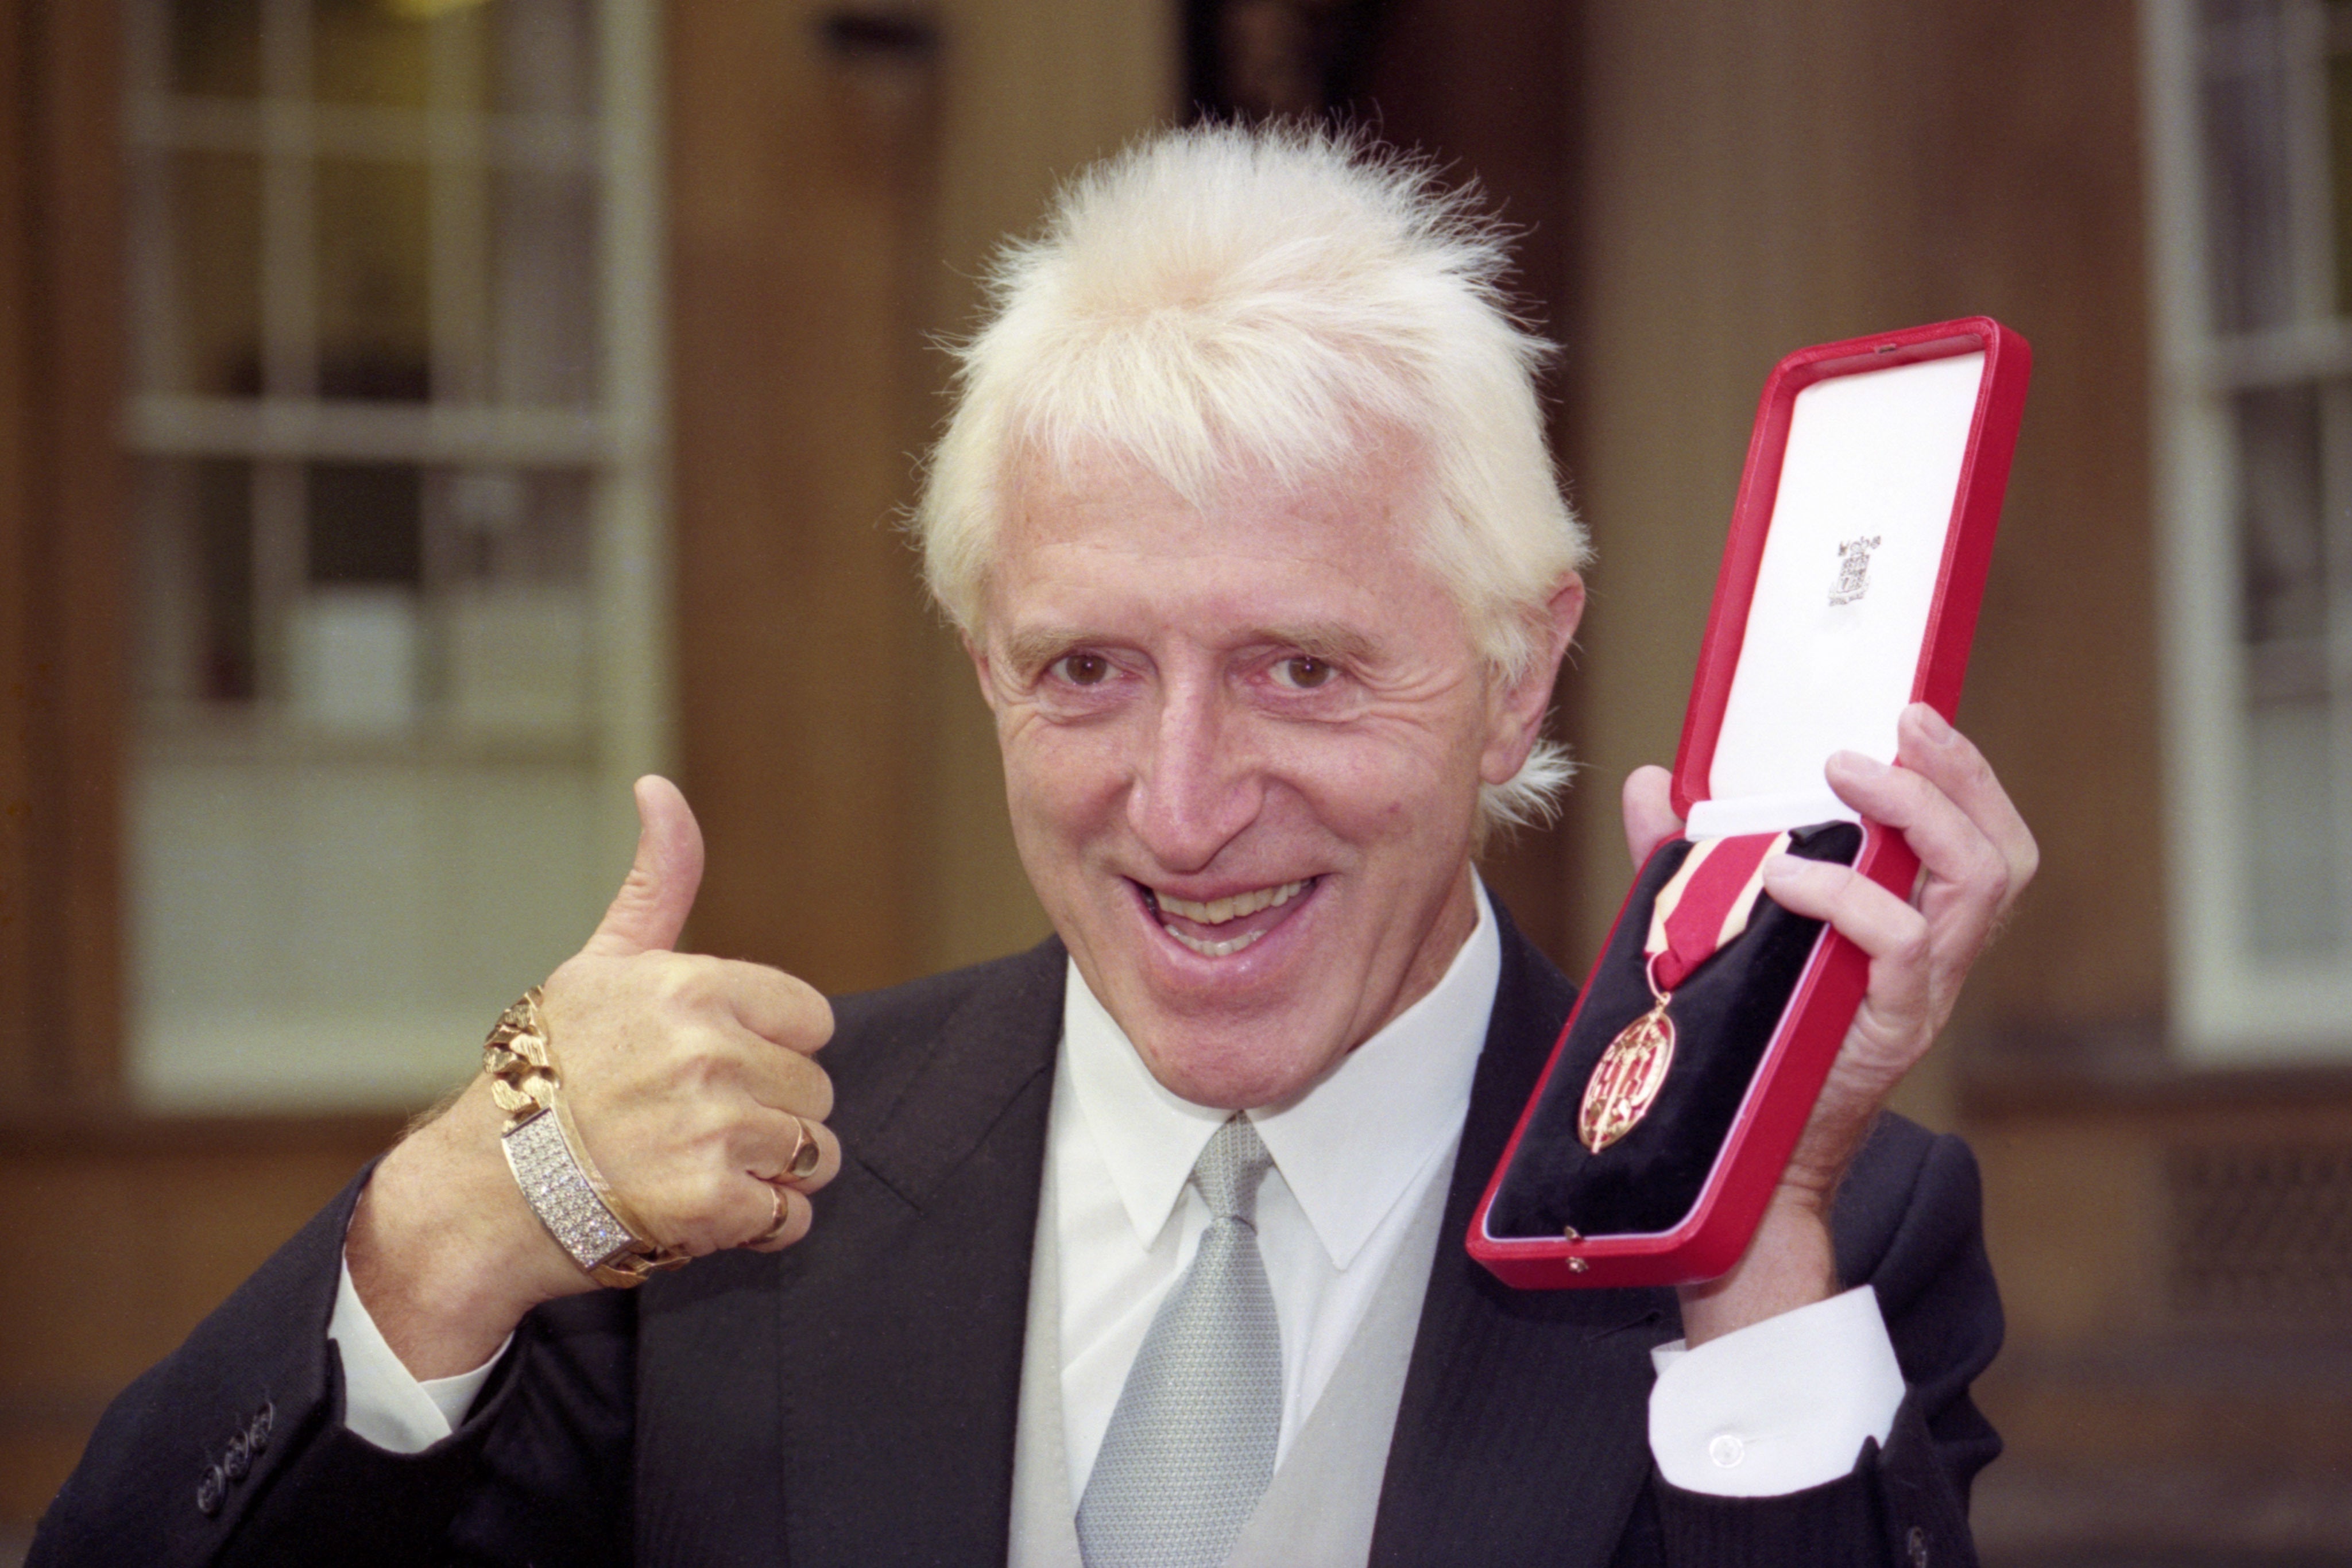 Jimmy Savile’s ‘interest in the mortuary was not within accepted boundaries’, a 2014 inquiry found